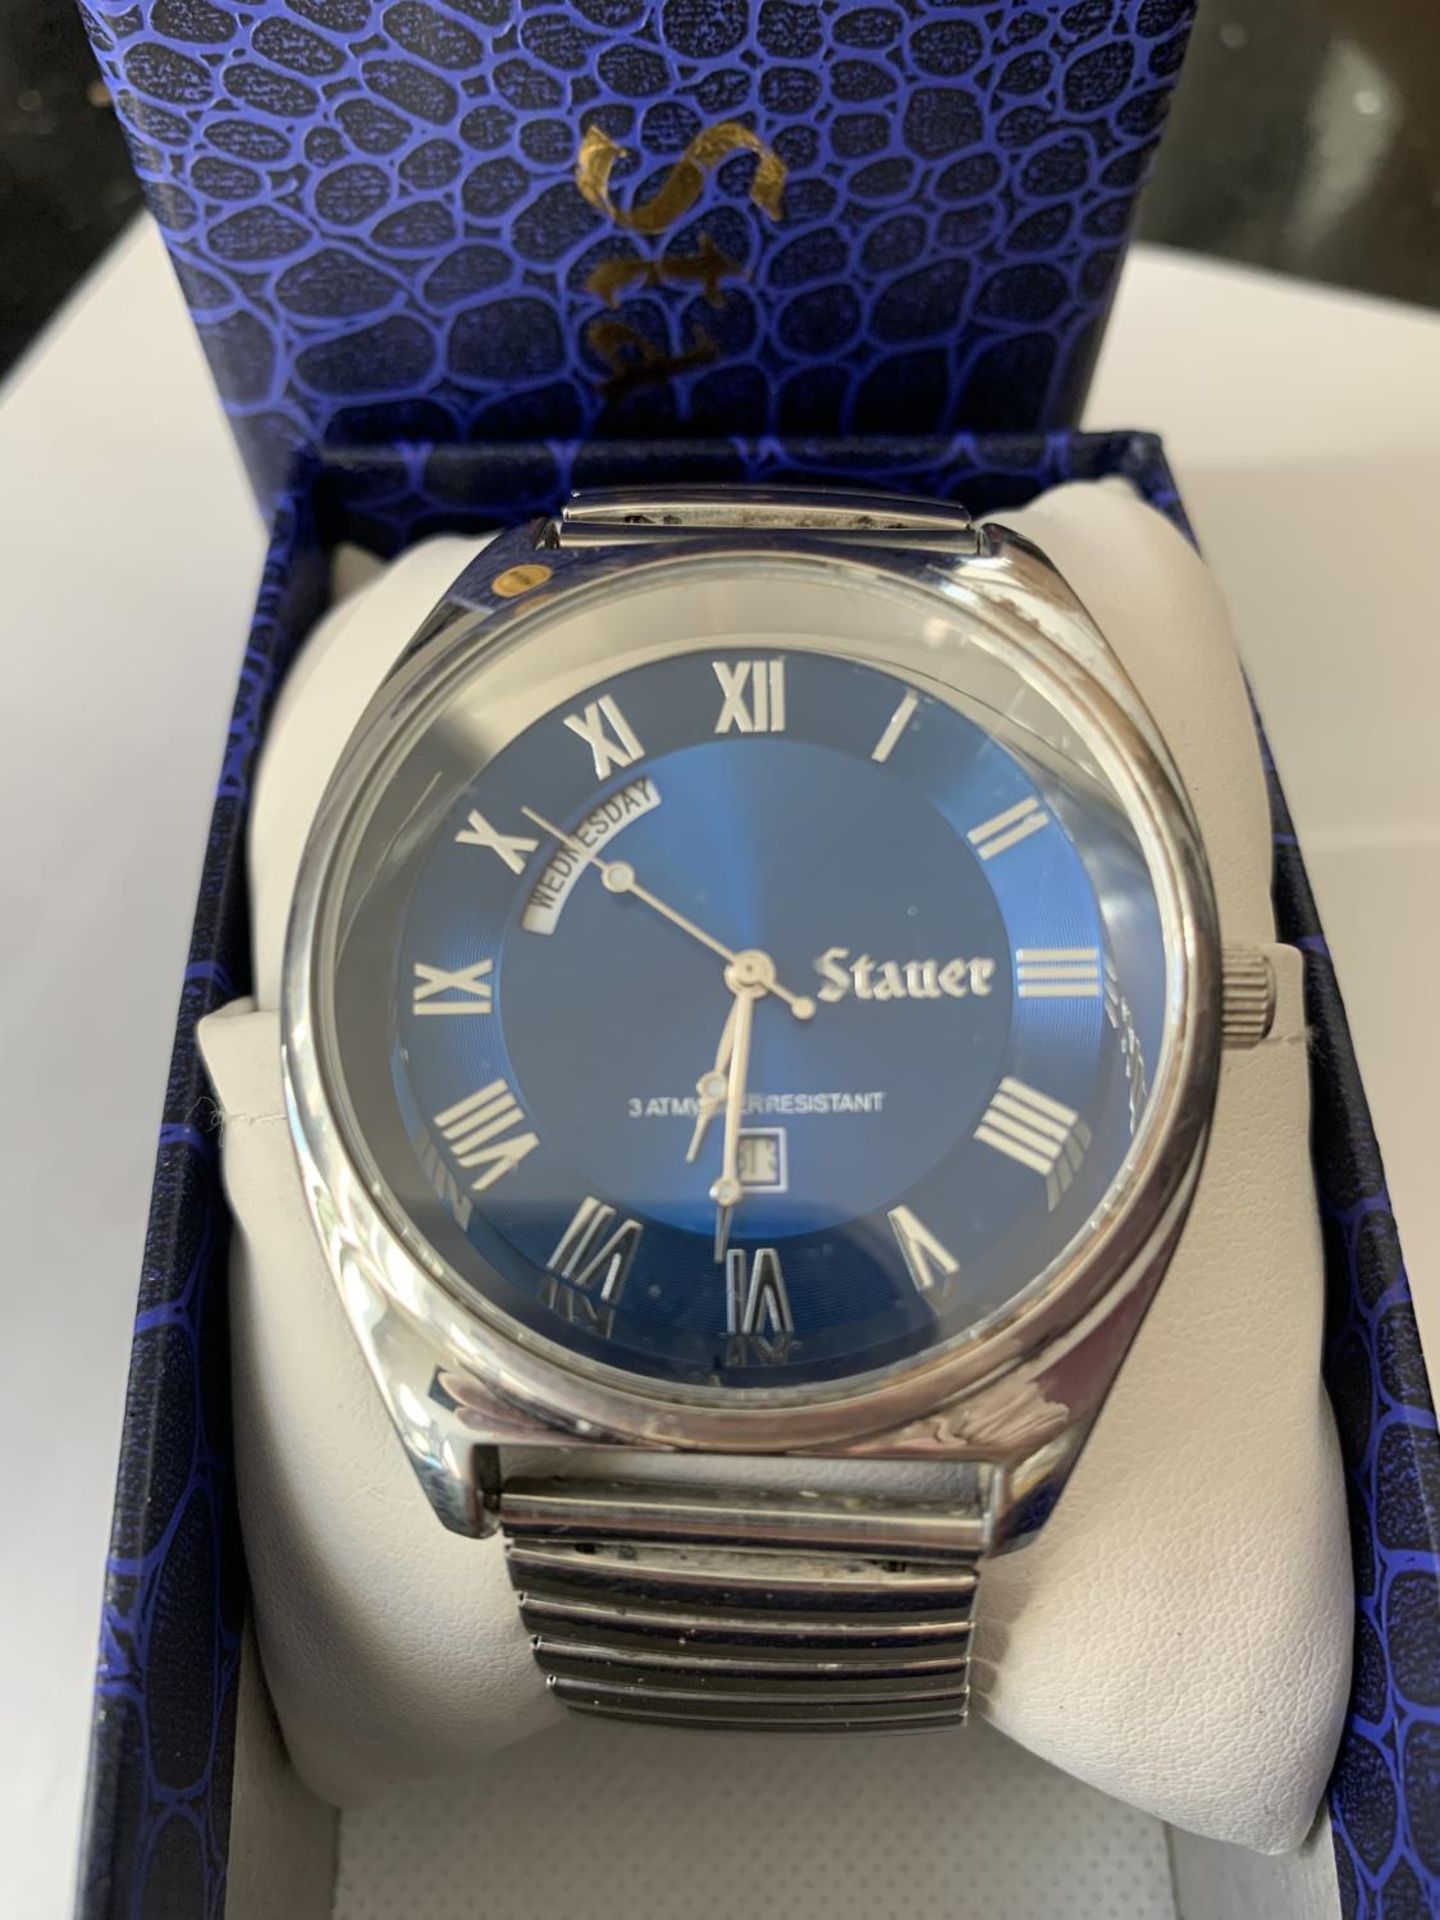 A STAUER WRISTWATCH IN A PRESENTATION BOX SEEN WORKING BUT NO WARRANTY - Image 2 of 3